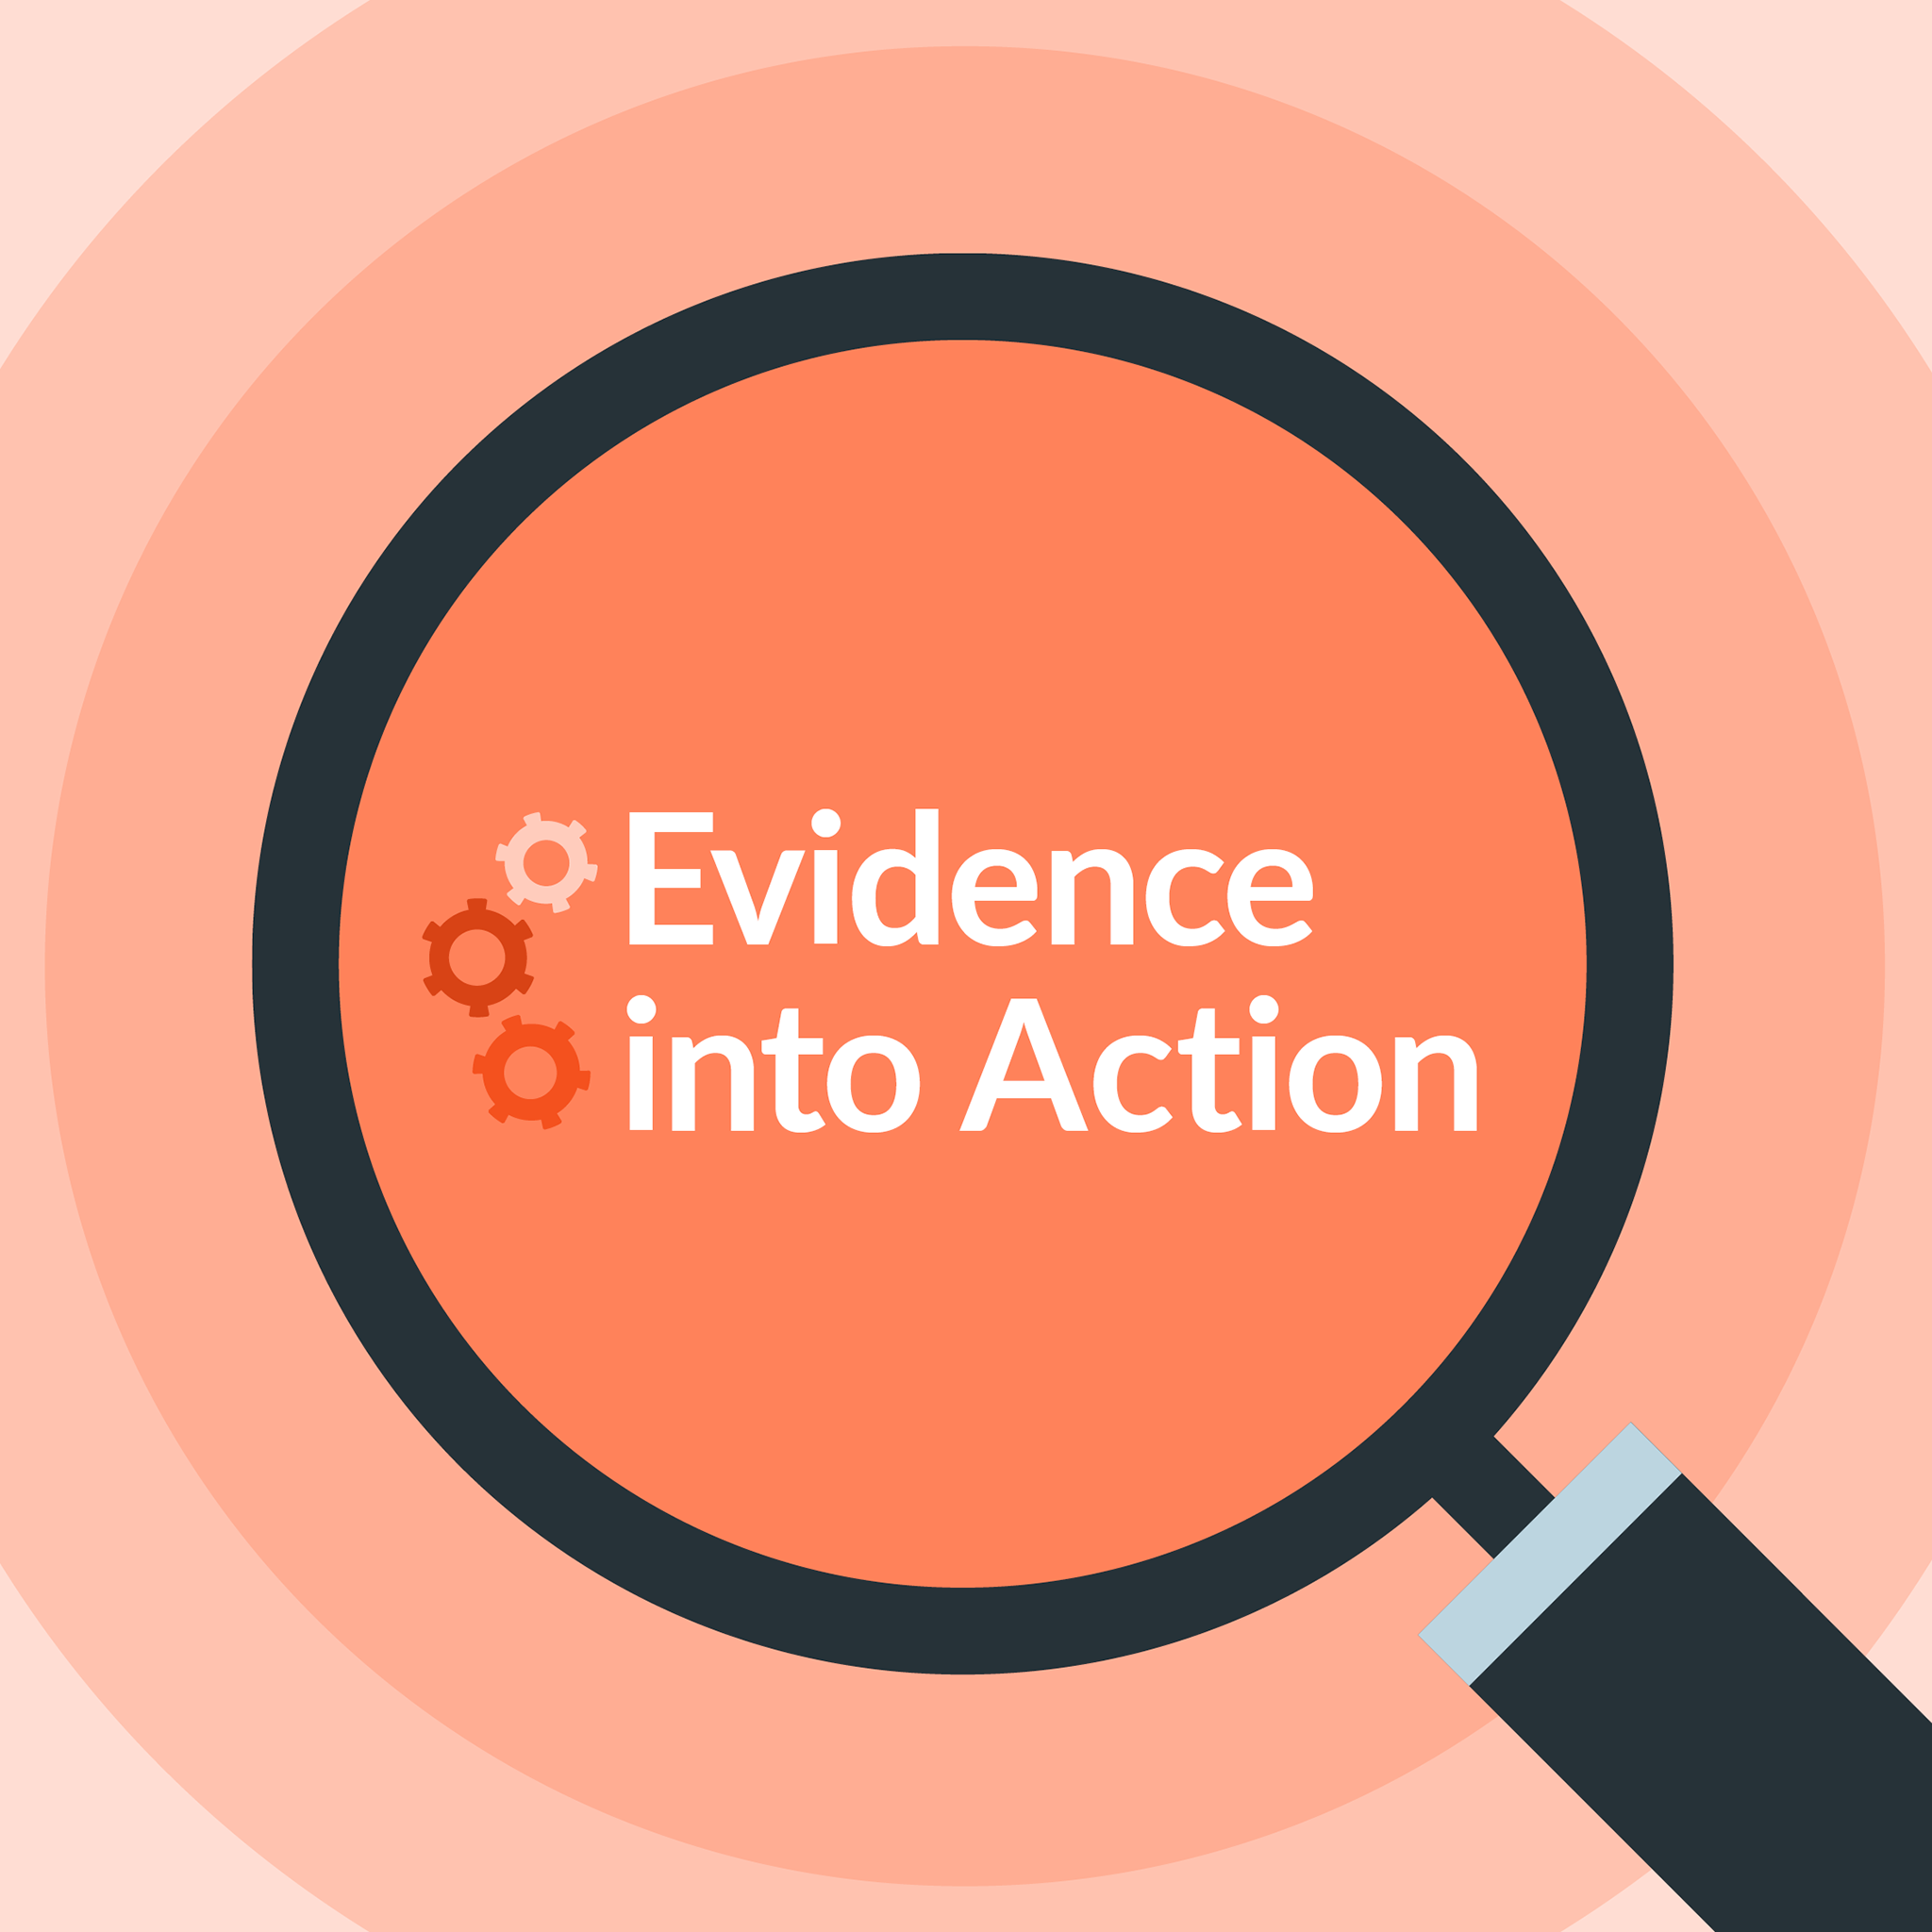 Evidence into Action